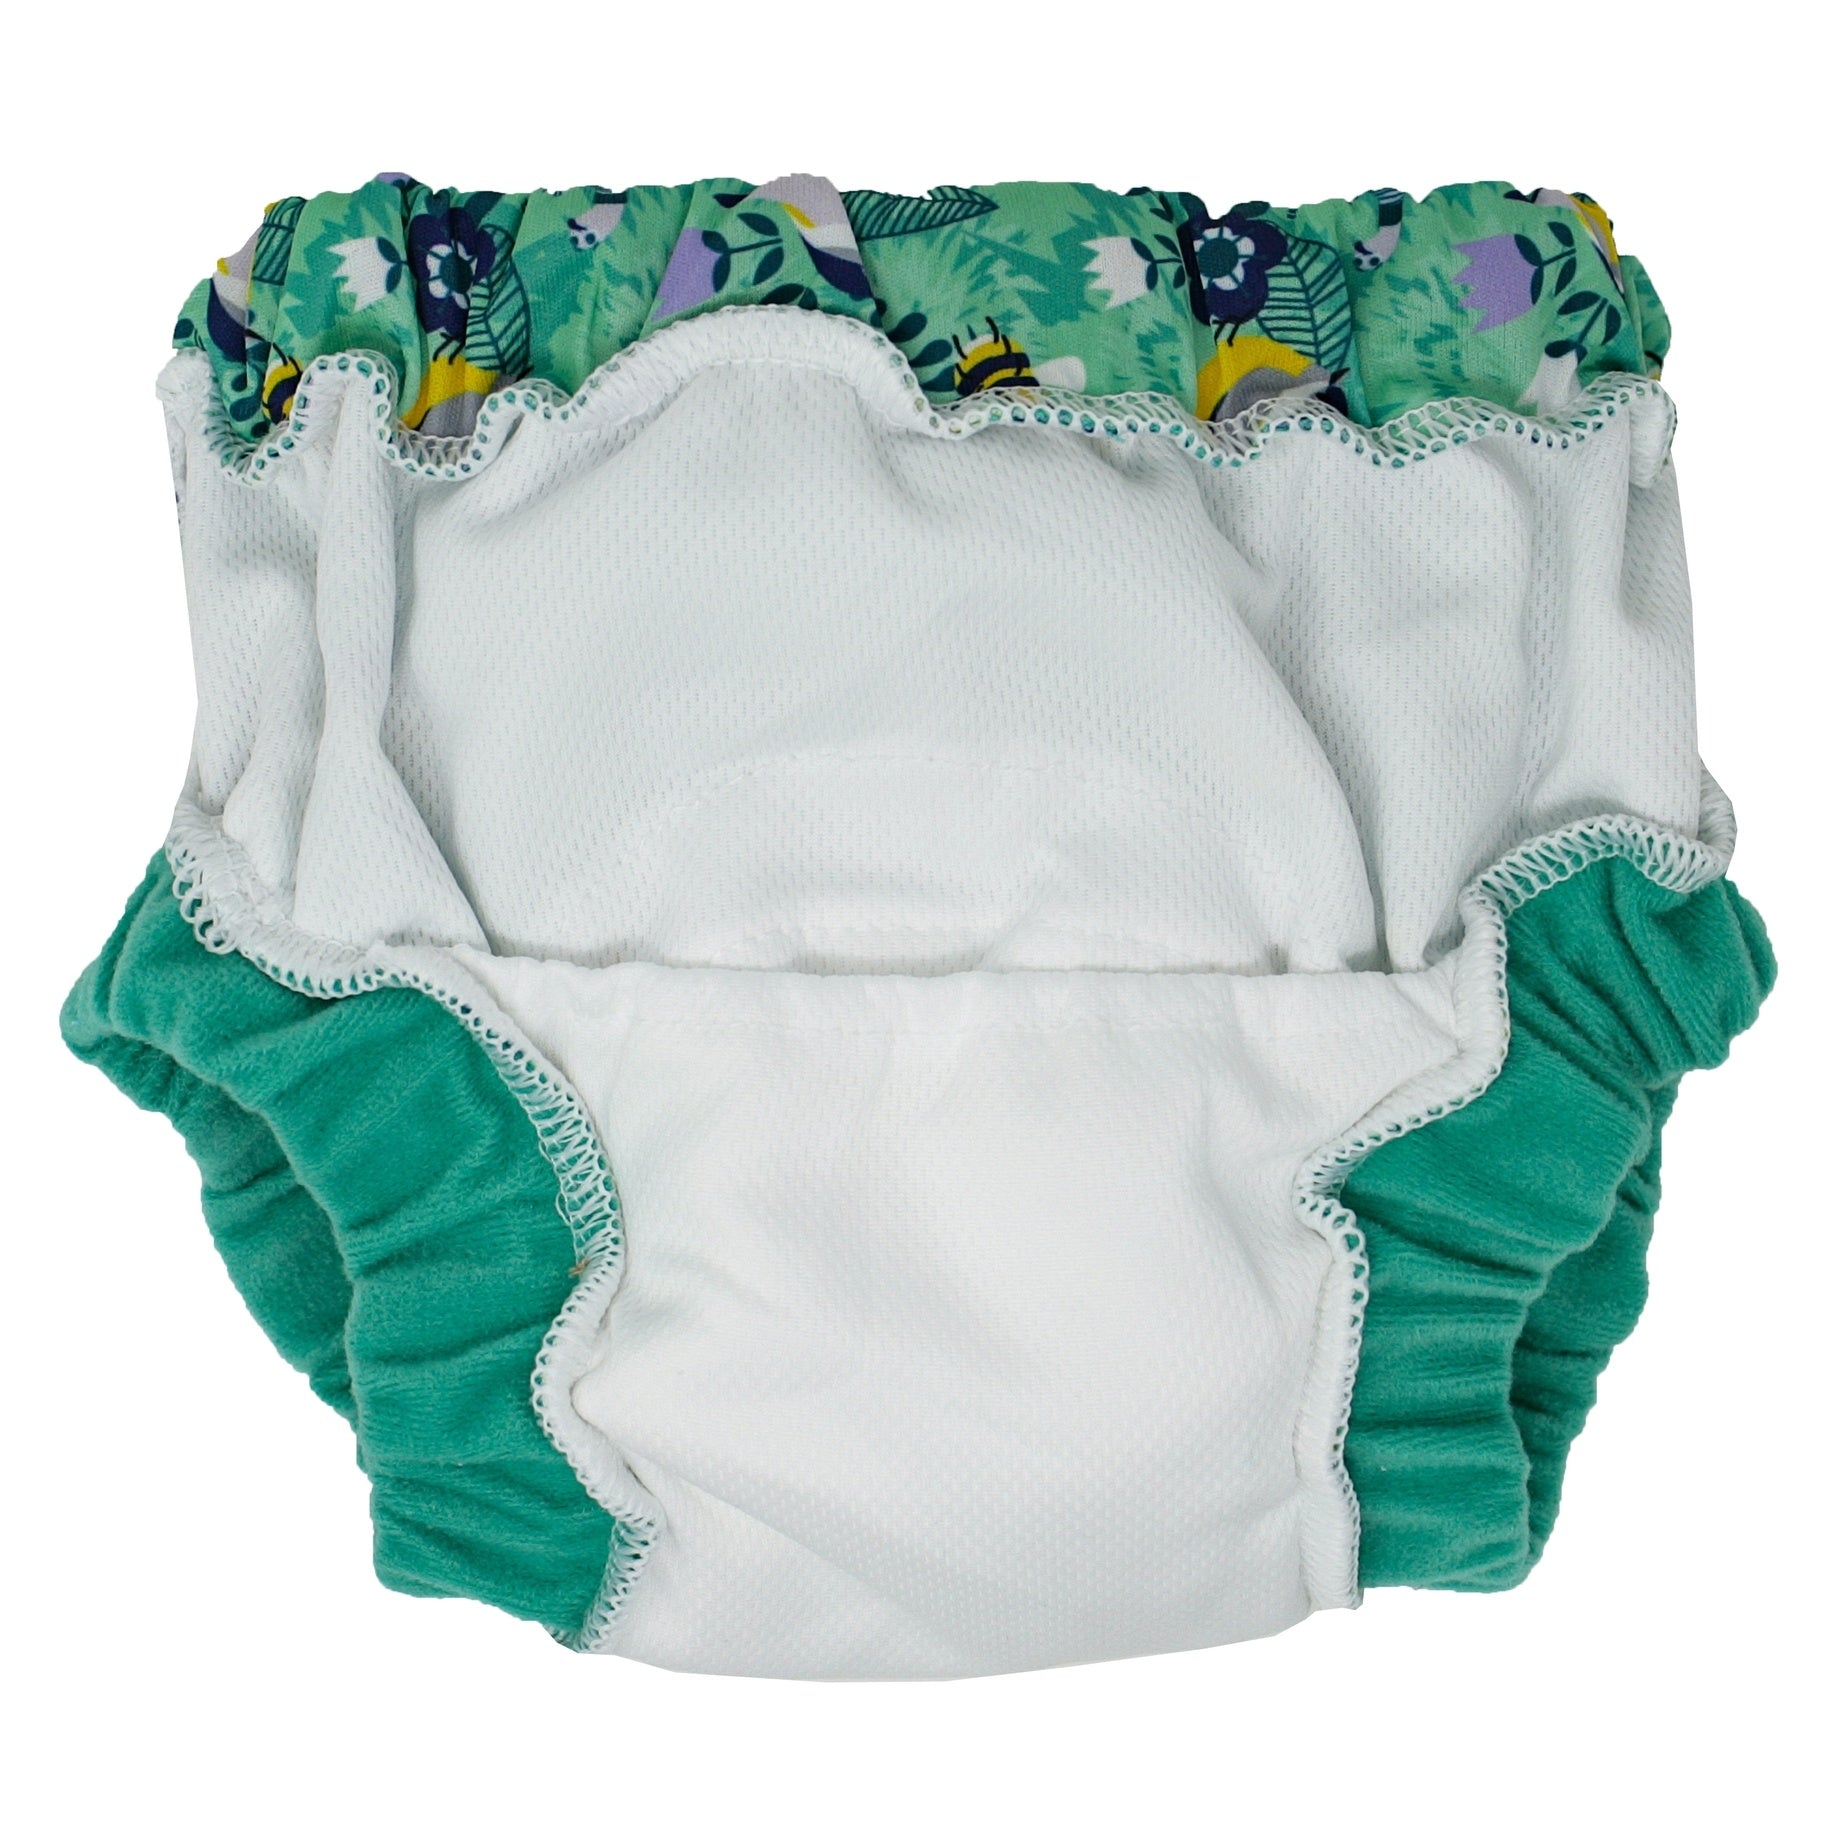 The Ins and Outs of Thirsties Potty Training Pants – Thirsties Baby